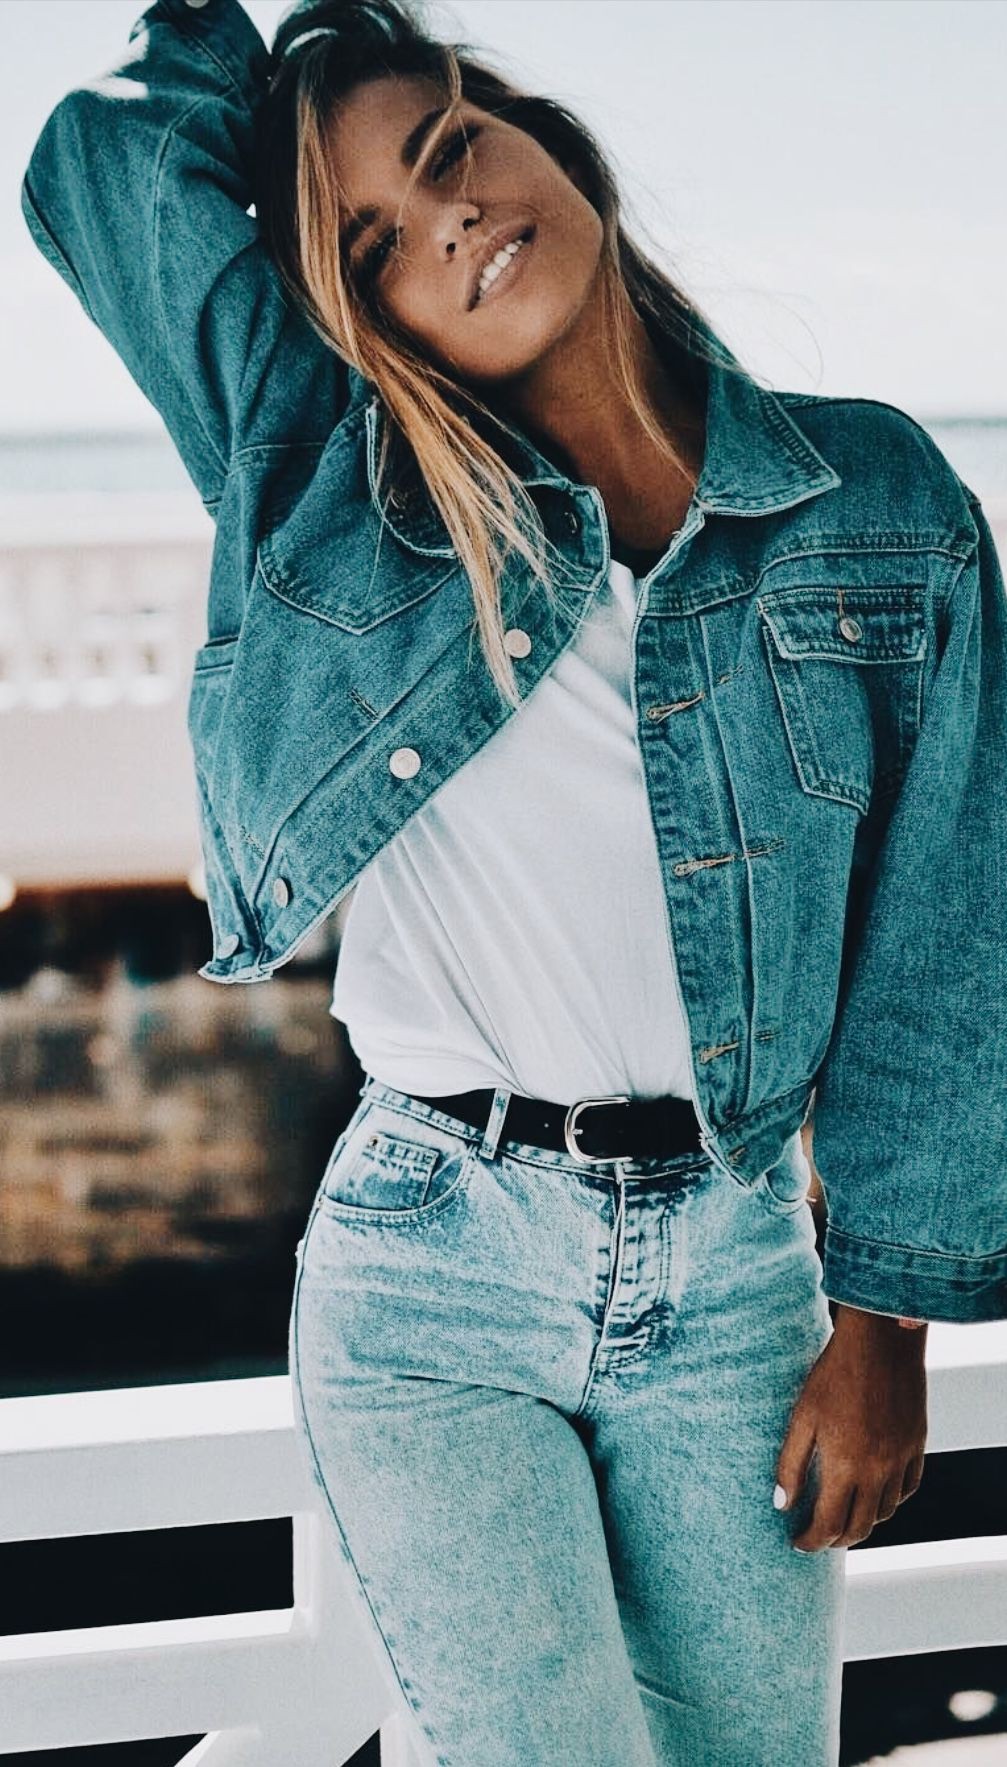 Turquoise style outfit with mom jeans, jacket, jeans | Denim On Denim ...